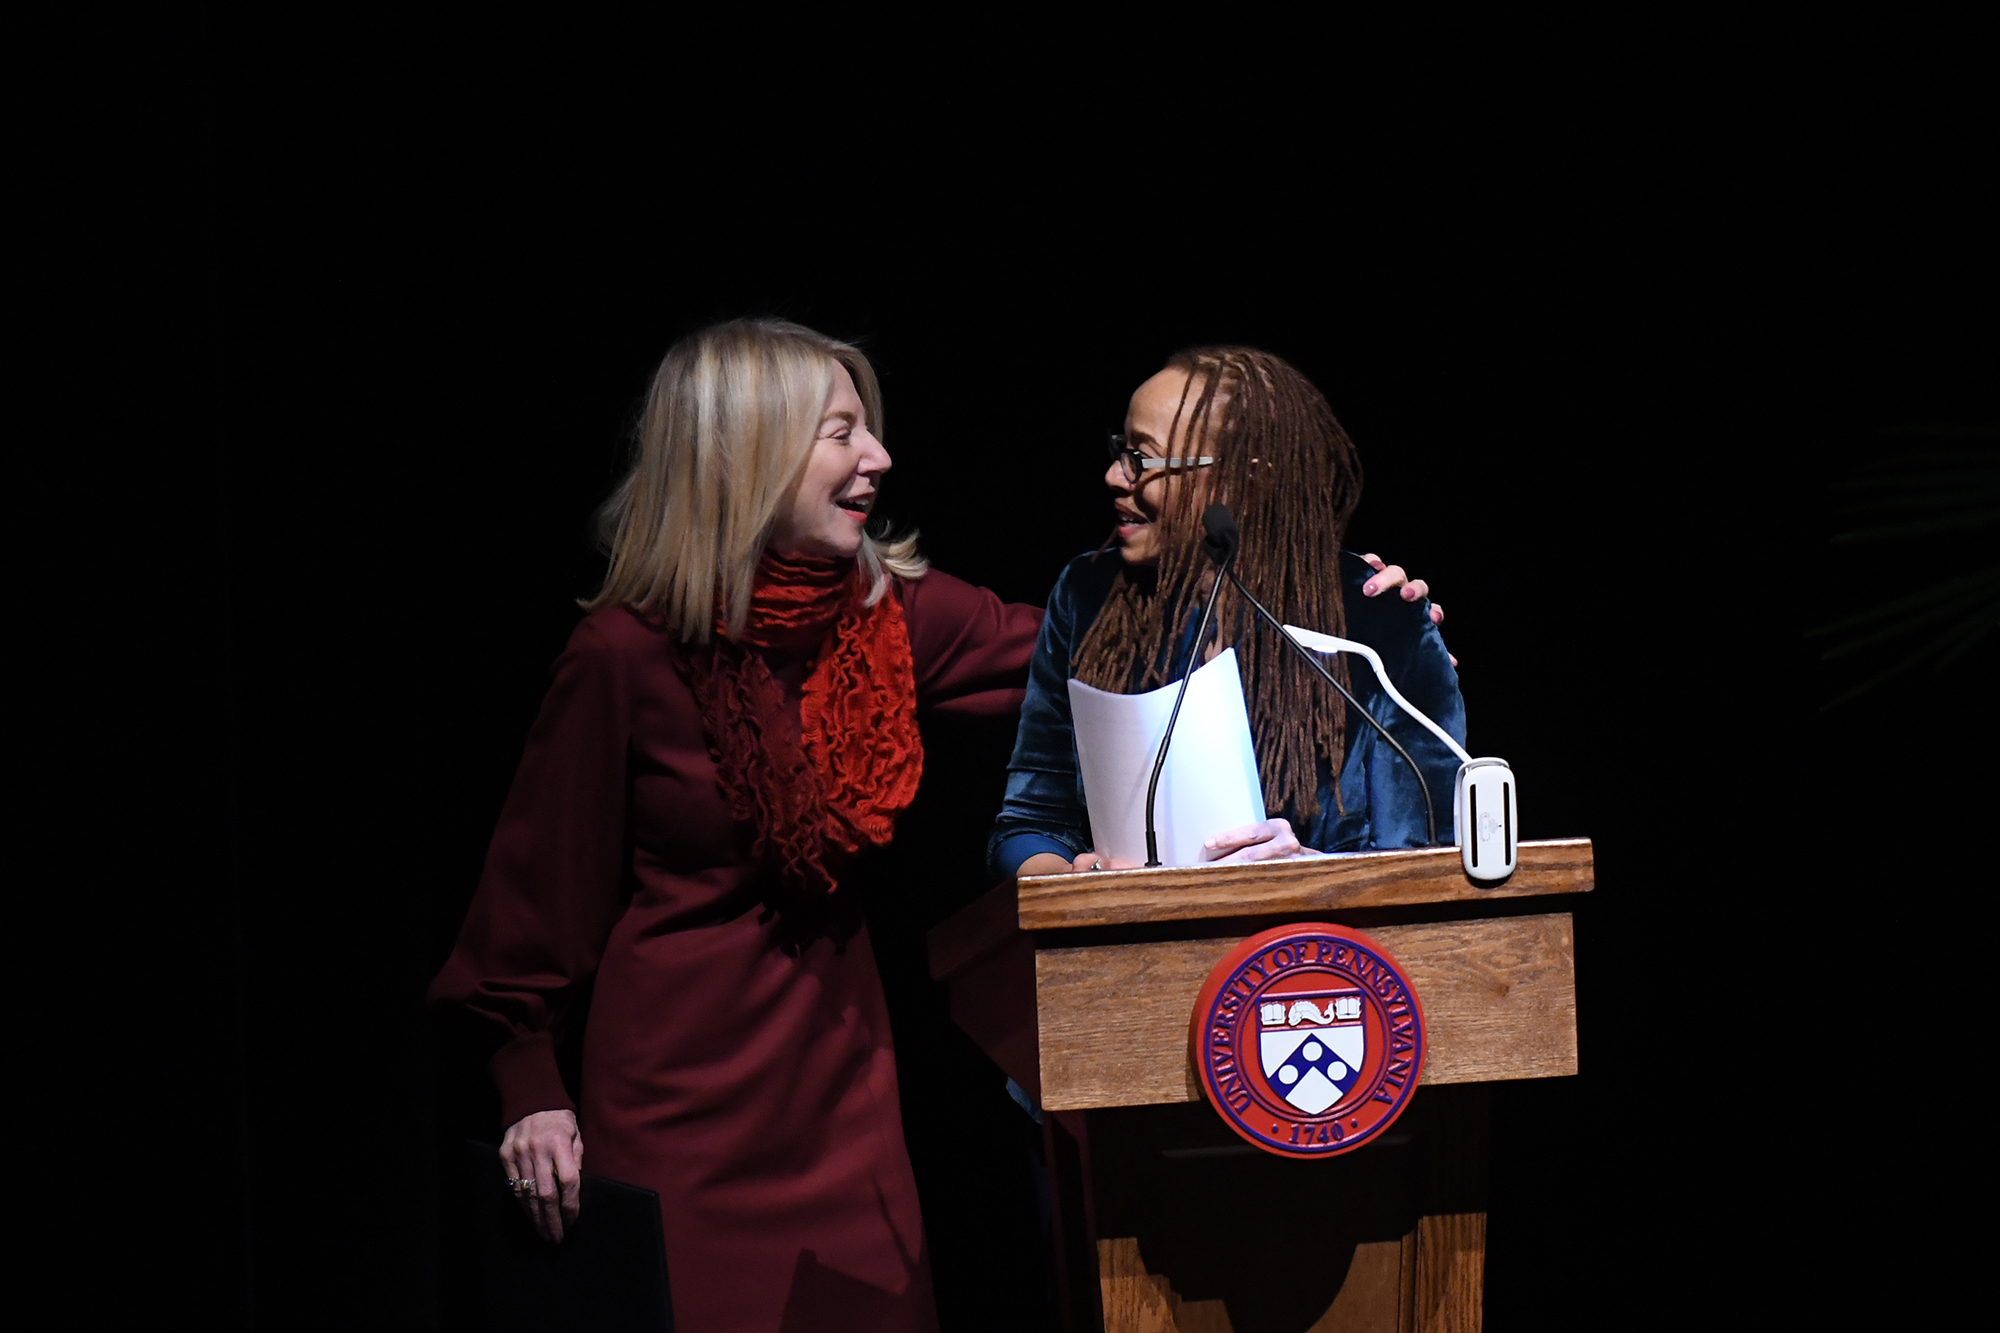 Penn President Amy Gutmann puts her arm around Dorothy Roberts shoulder who is at a University of Pennsylvania podium